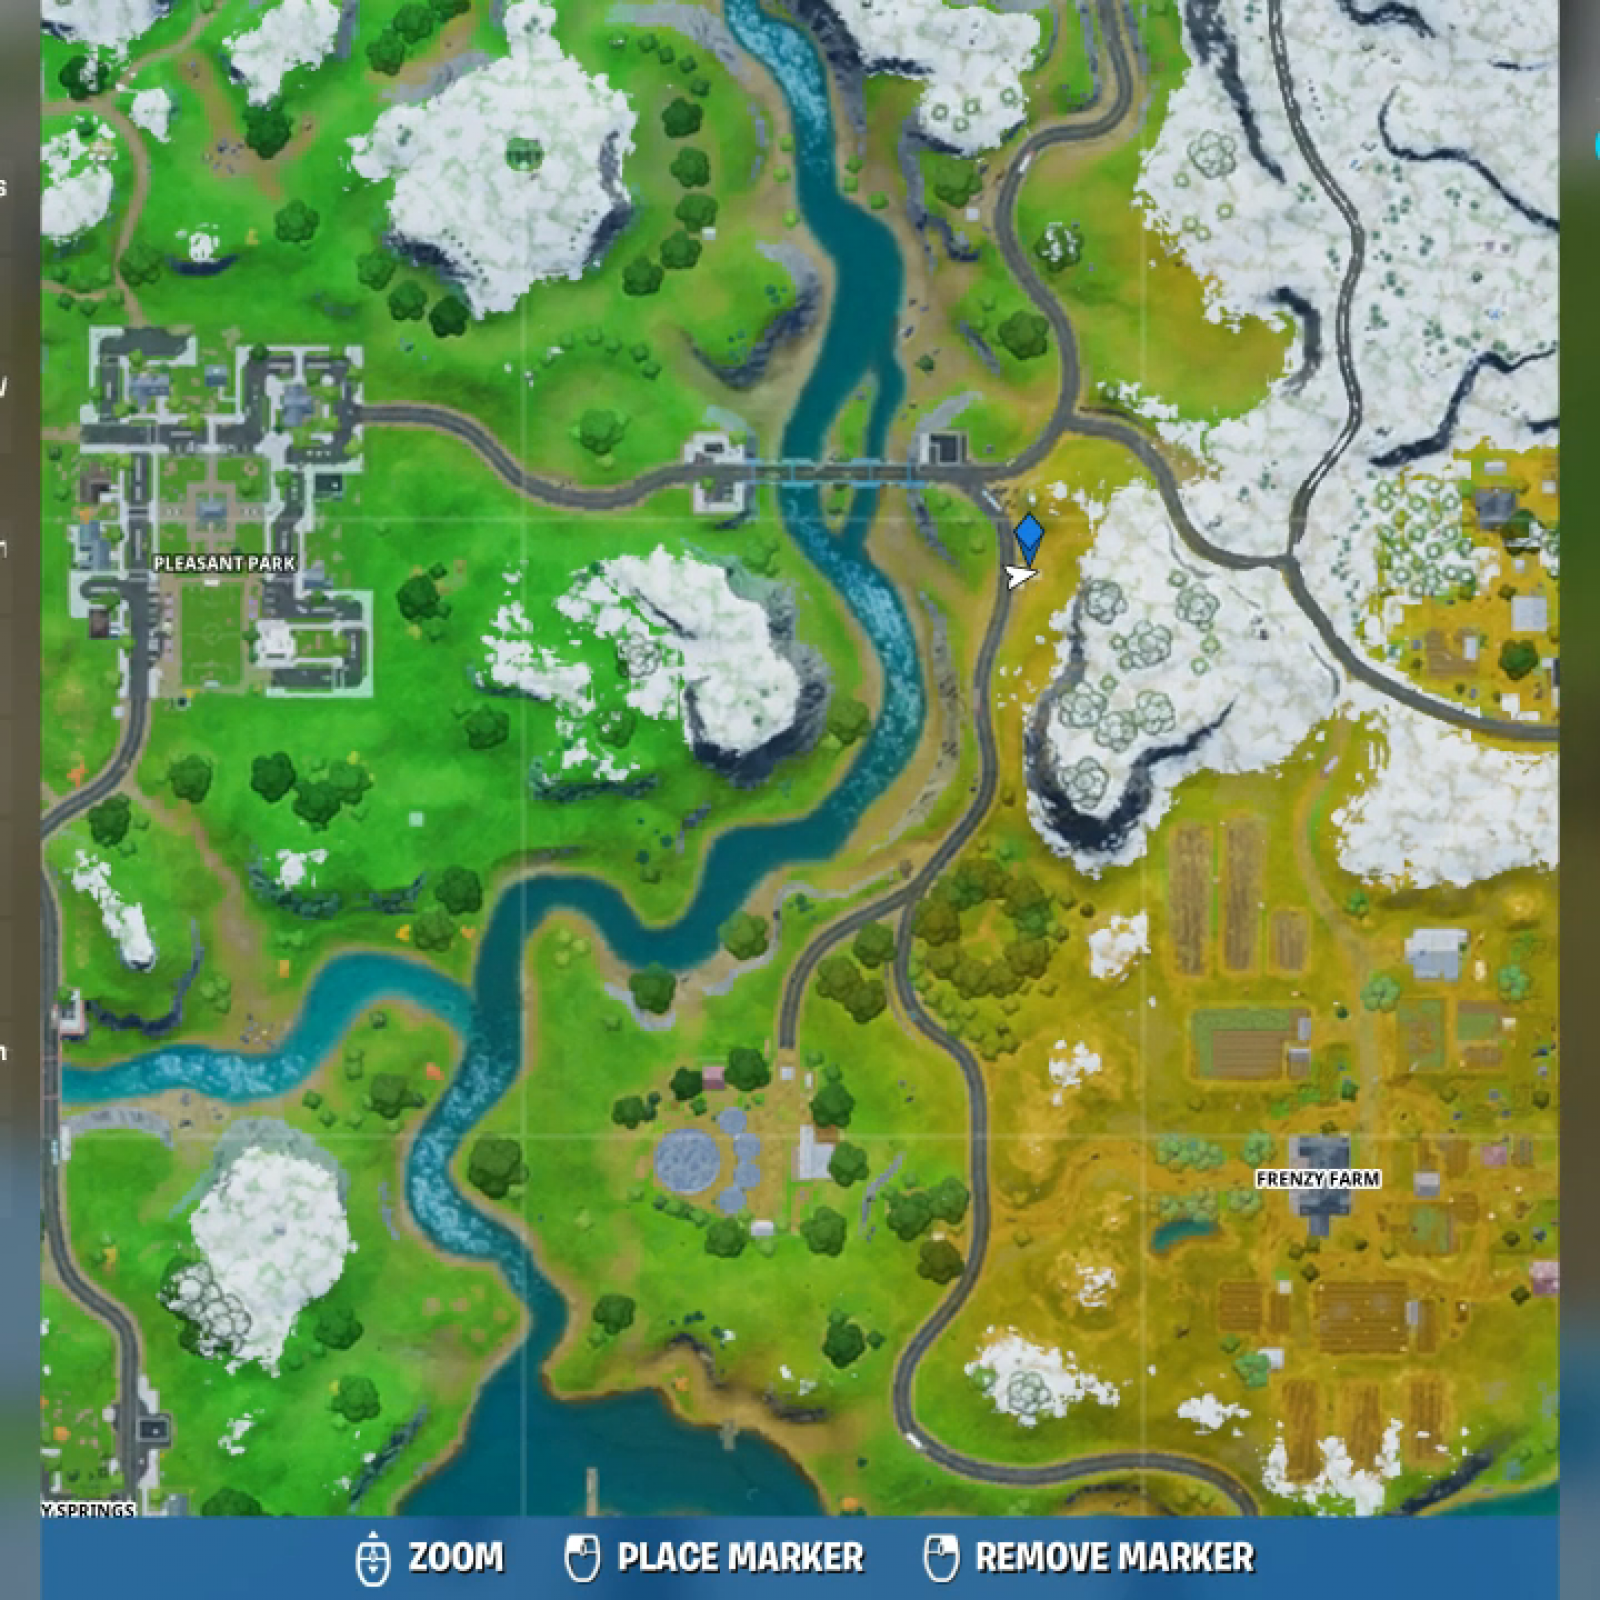 Fortnite Visit Bus Stop Locations Chapter 2 Overtime Challenge Guide